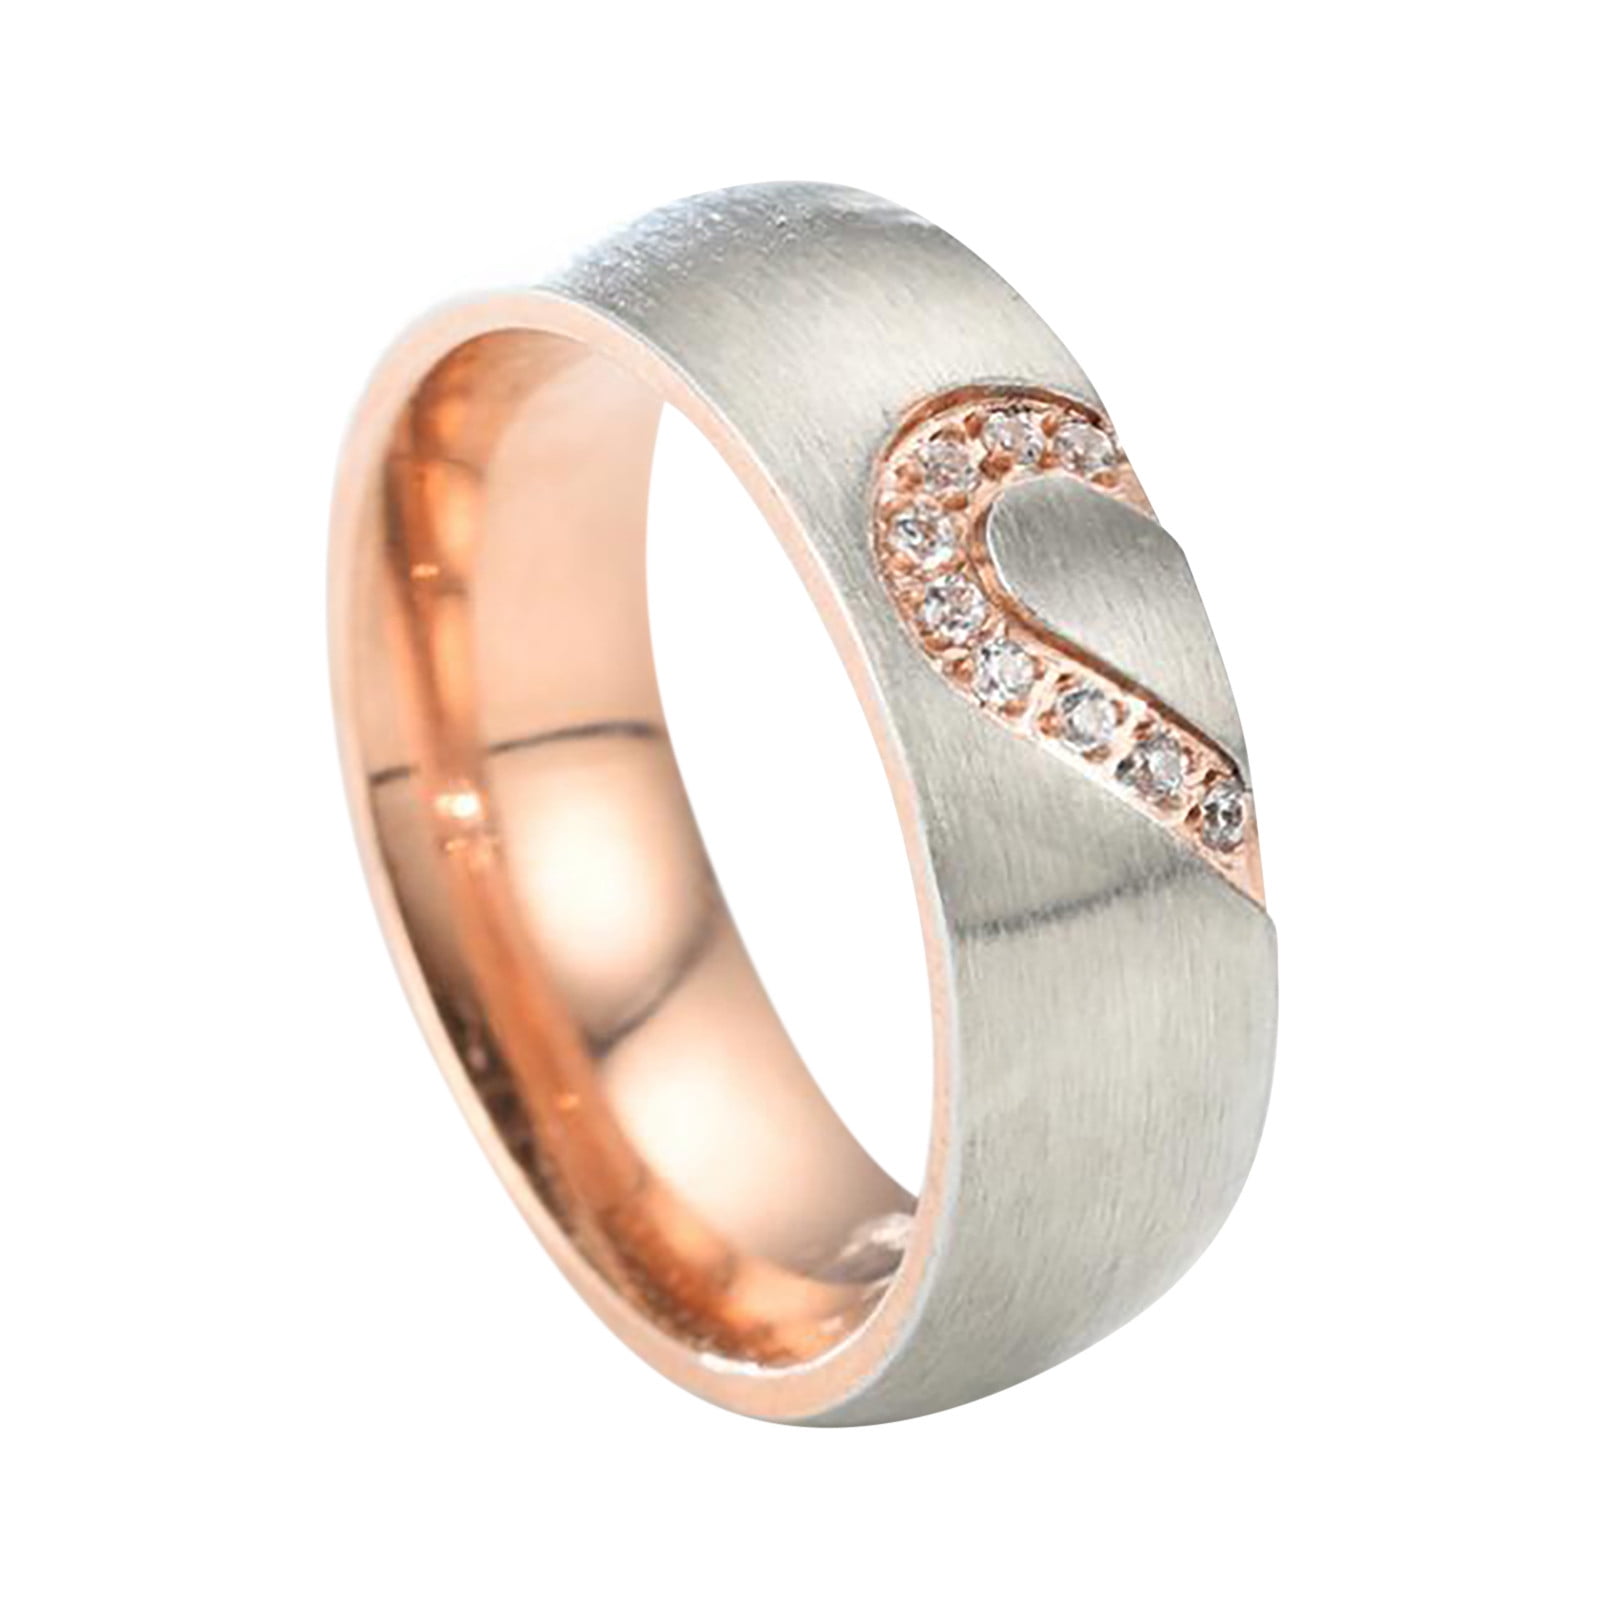 Menstruatie Gevestigde theorie Vervallen chaolei Ring For Women Size 7 Steel Rings Couple Steel European American  Diamond And Jewelry Couples Titanium Heart-Shaped Stainless Peach Size513  Ring Half Rings Gifts for Women Men - Walmart.com